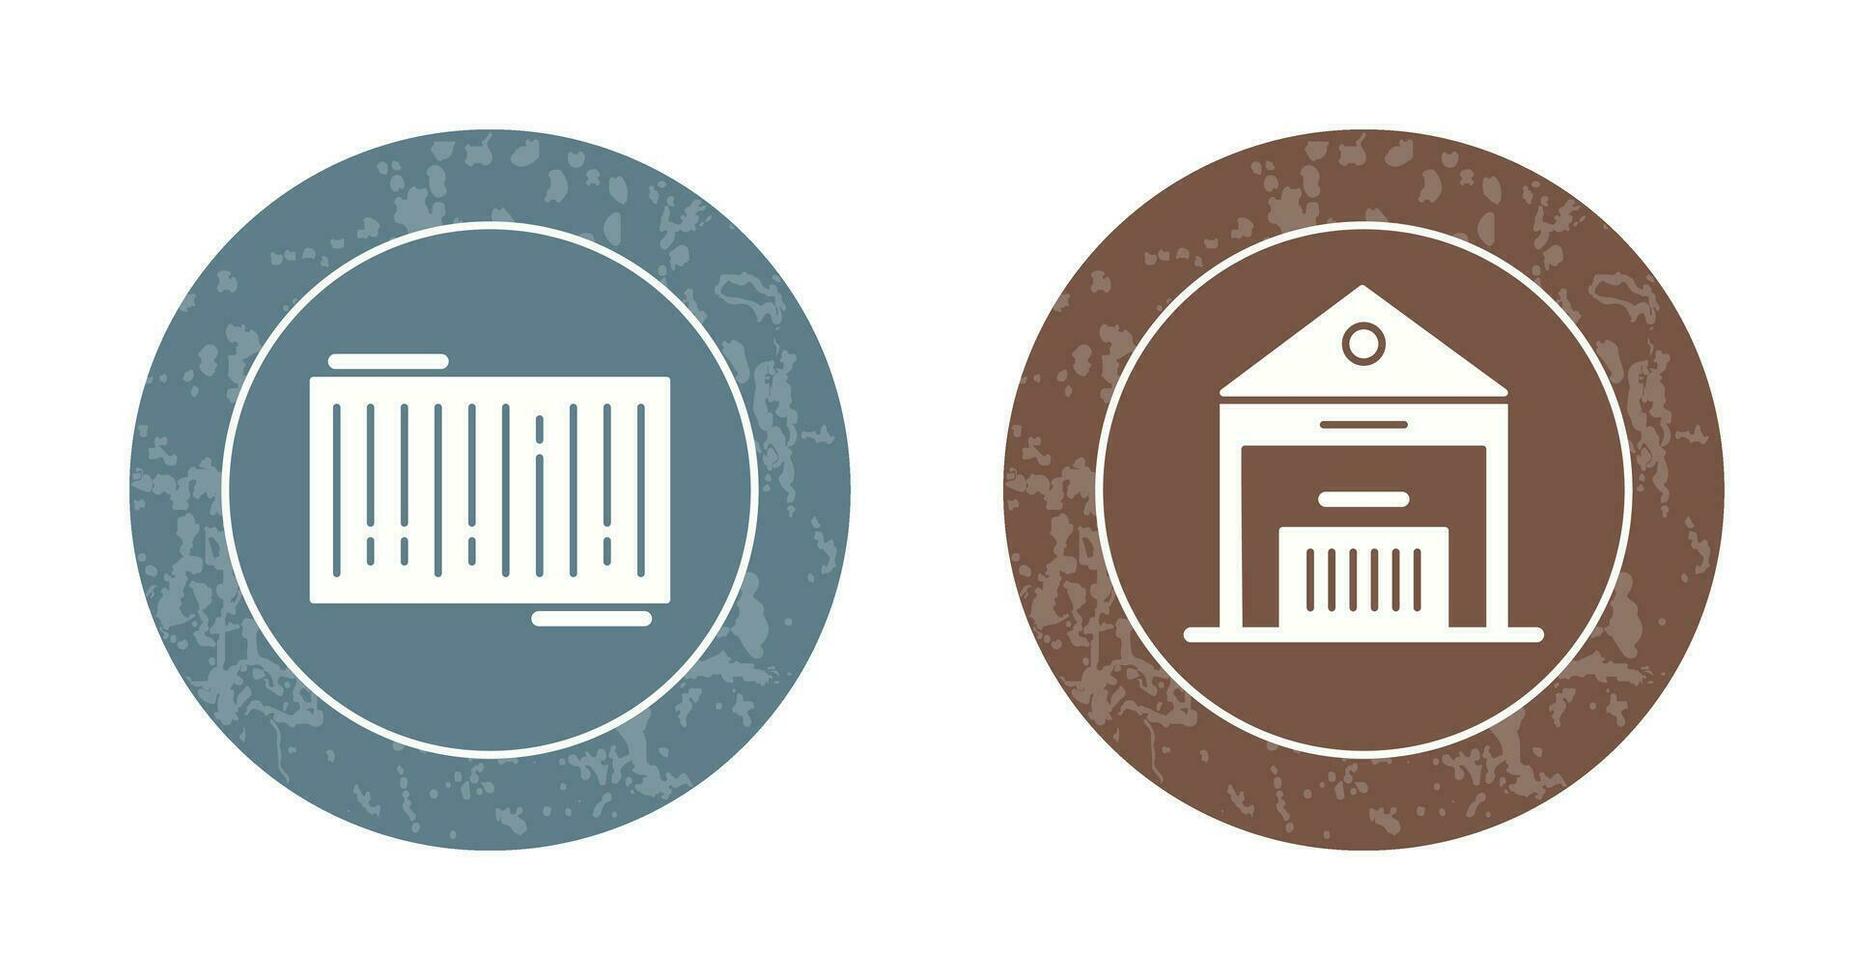 barcode and warehouse Icon vector